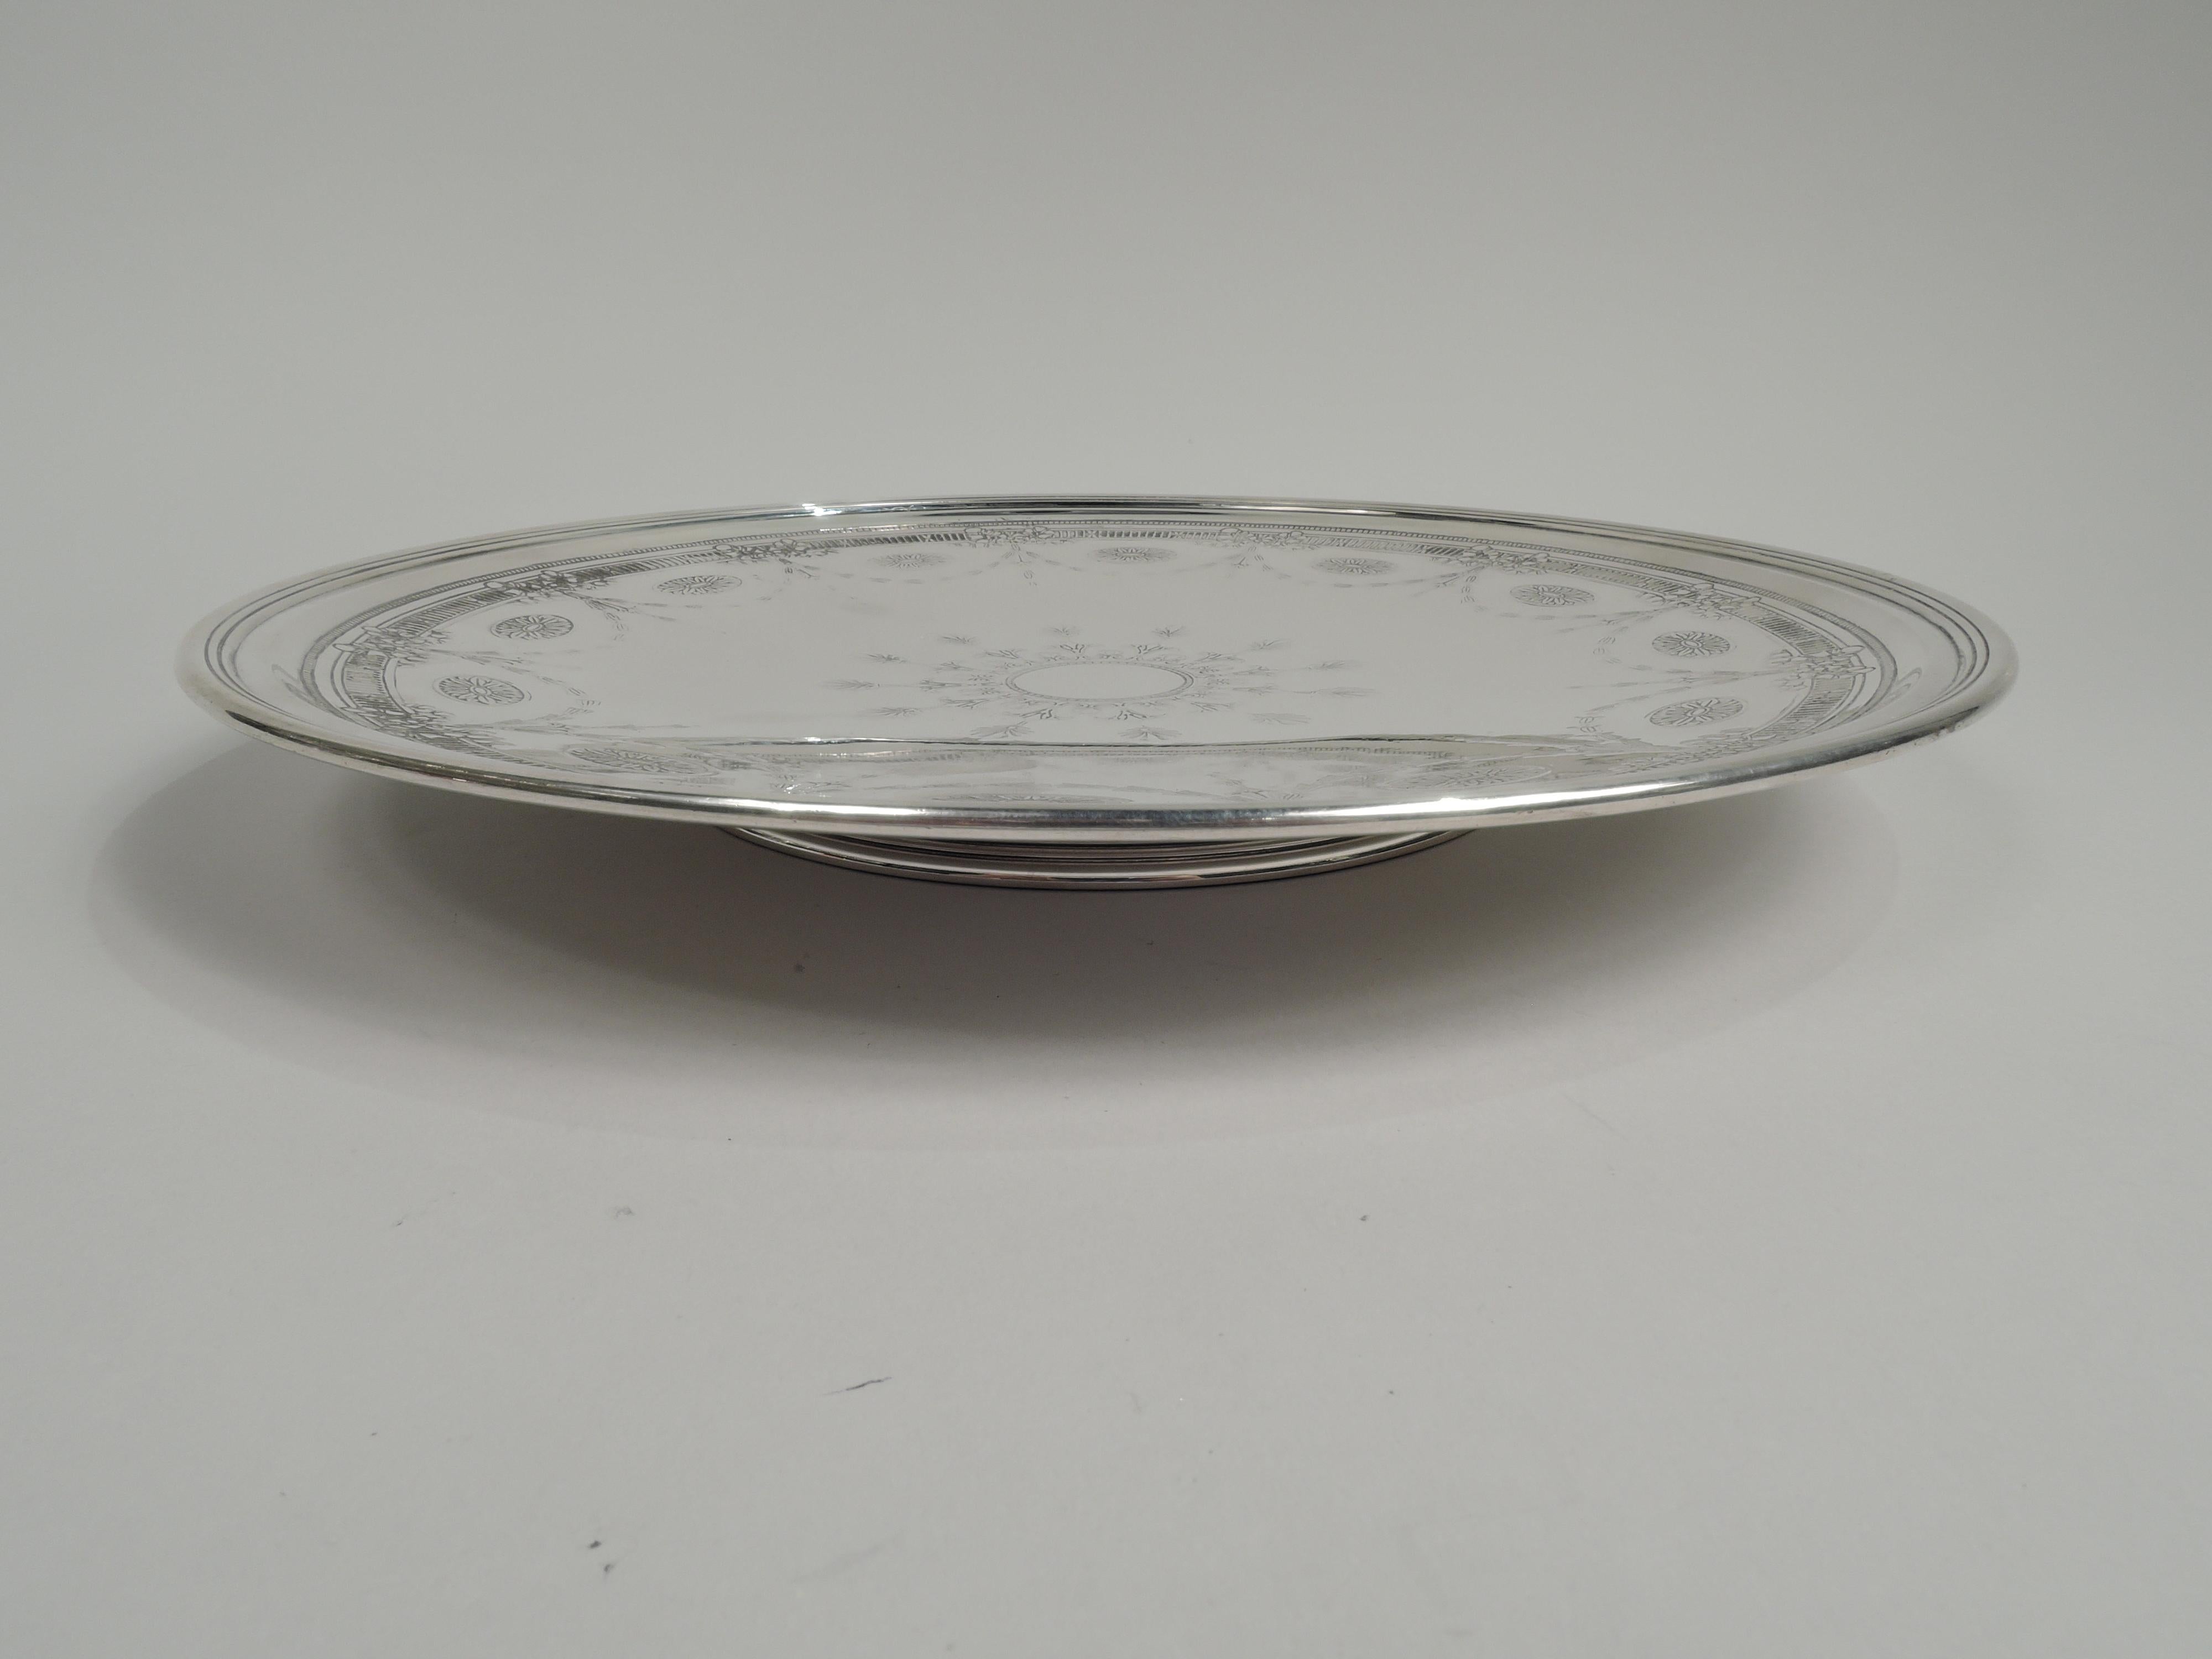 Edwardian Regency sterling silver cake plate. Made by Tiffany & Co. in New York, ca 1914. Round and shallow with reeded rim and round and stepped inset foot. Acid etched ornament: Dentil and fluted borders and pendant swags inset with paterae.